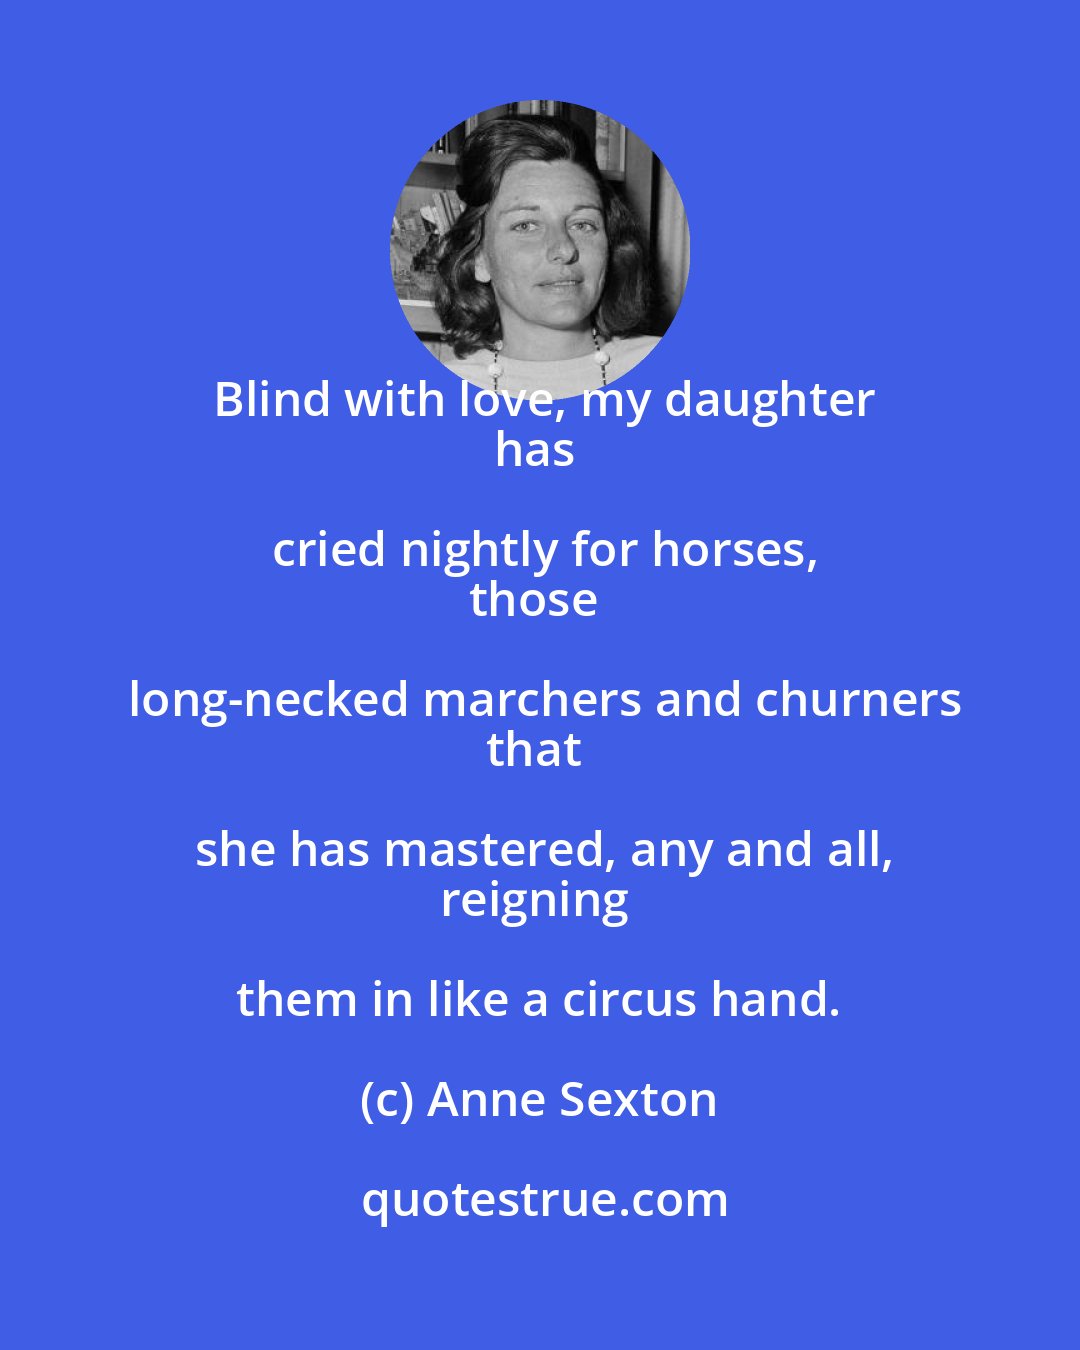 Anne Sexton: Blind with love, my daughter
has cried nightly for horses,
those long-necked marchers and churners
that she has mastered, any and all,
reigning them in like a circus hand.